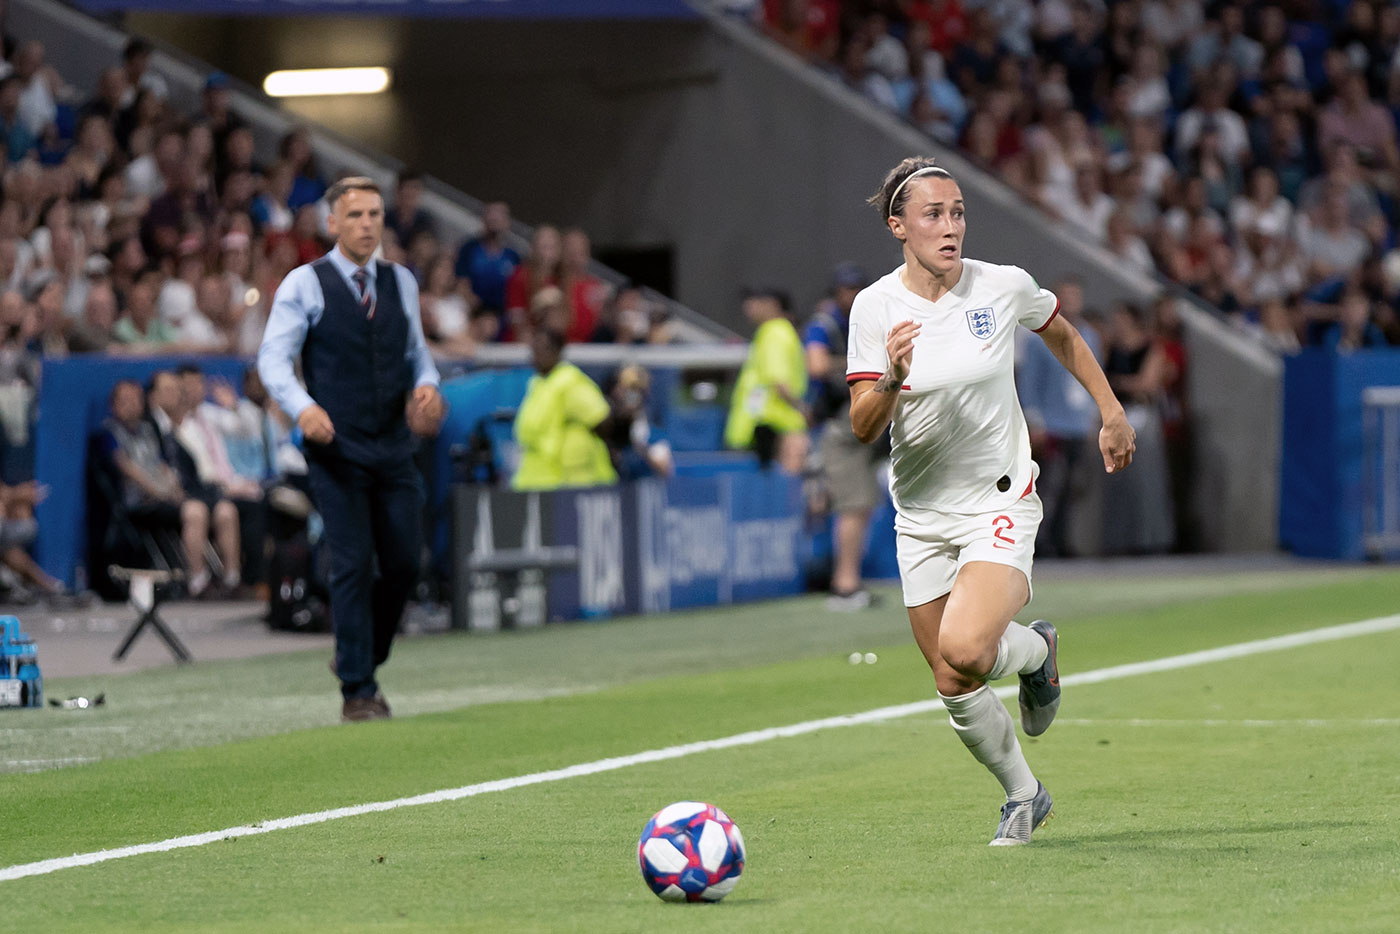 England's Lucy Bronze on the move. (Manette Gonzales / OGM)